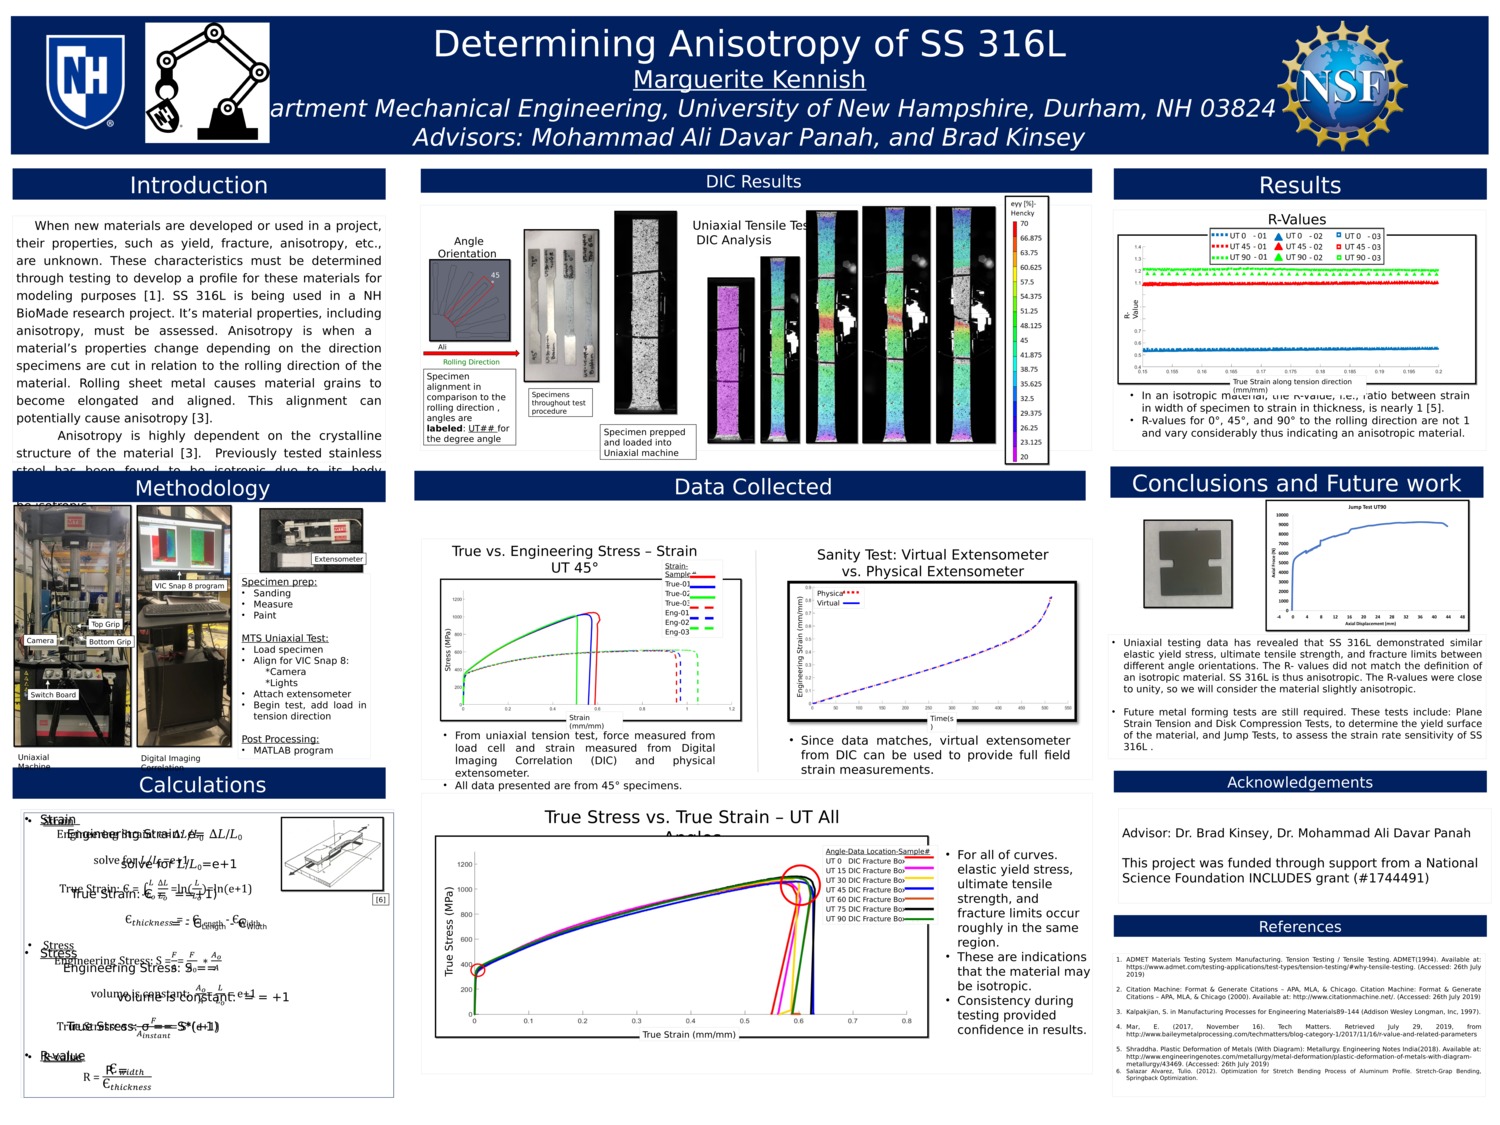 Determining Anisotropy Of Ss316l by mrk1021